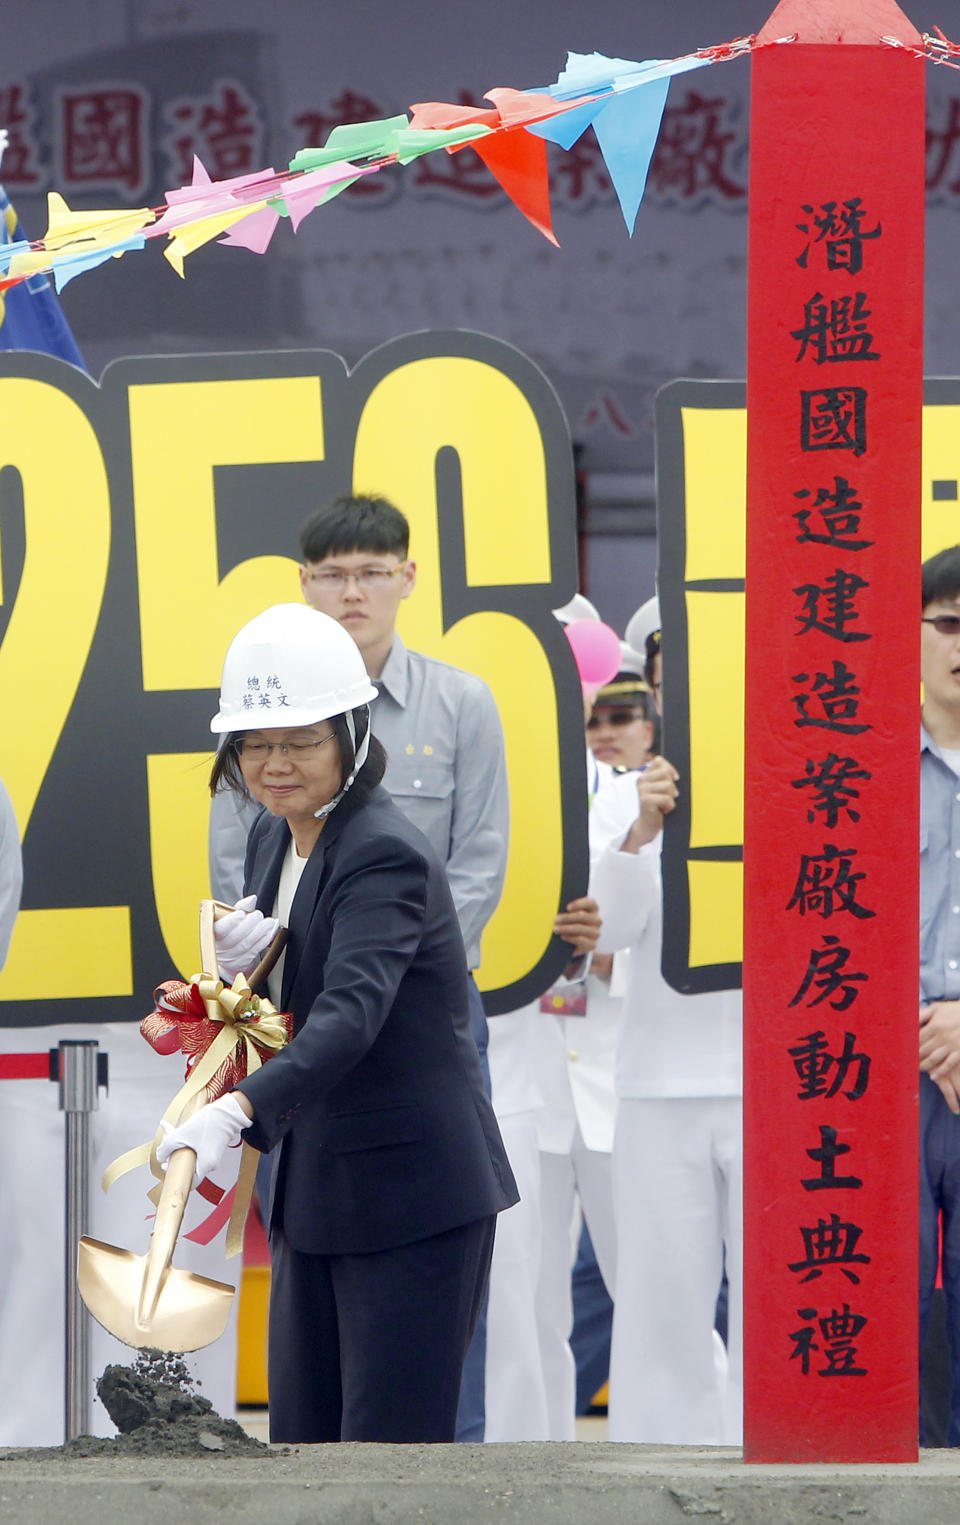 Taiwan's President Tsai Ing-wen breaks ground for Taiwan navy''s indigenous submarine factory during a groundbreaking ceremony in Kaohsiung, southern of Taiwan, Thursday, May 9, 2019. (AP Photo/Chiang Ying-ying)